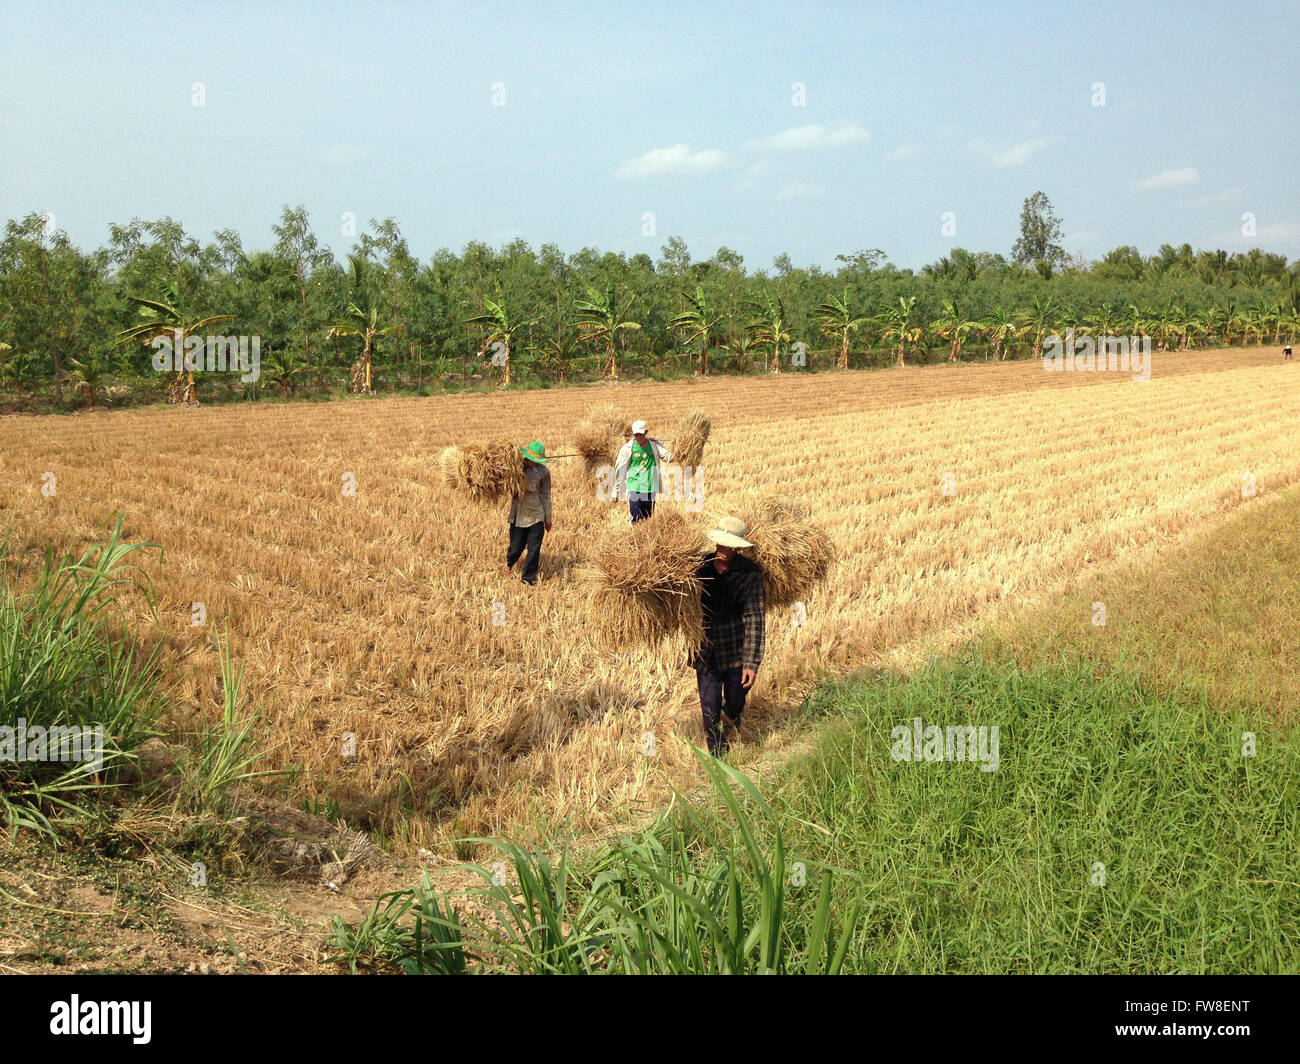 Ho Chi Minh City, Vietnam. 29th Mar, 2016. Local farmers carry withered straw to feed cattle in Ben Tre province, Vietnam, March 29, 2016. Due to the strong influence of the El Nino phenomenon, the Mekong Delta in southern Vietnam has encountered once in a century drought since the end of 2015 which seriously affected local people's life. Mekong Delta, Vietnam's largest and most fertile plain, has an area of over 40,000 square kilometers and covers 13 provinces and cities. © VNA/Xinhua/Alamy Live News Stock Photo